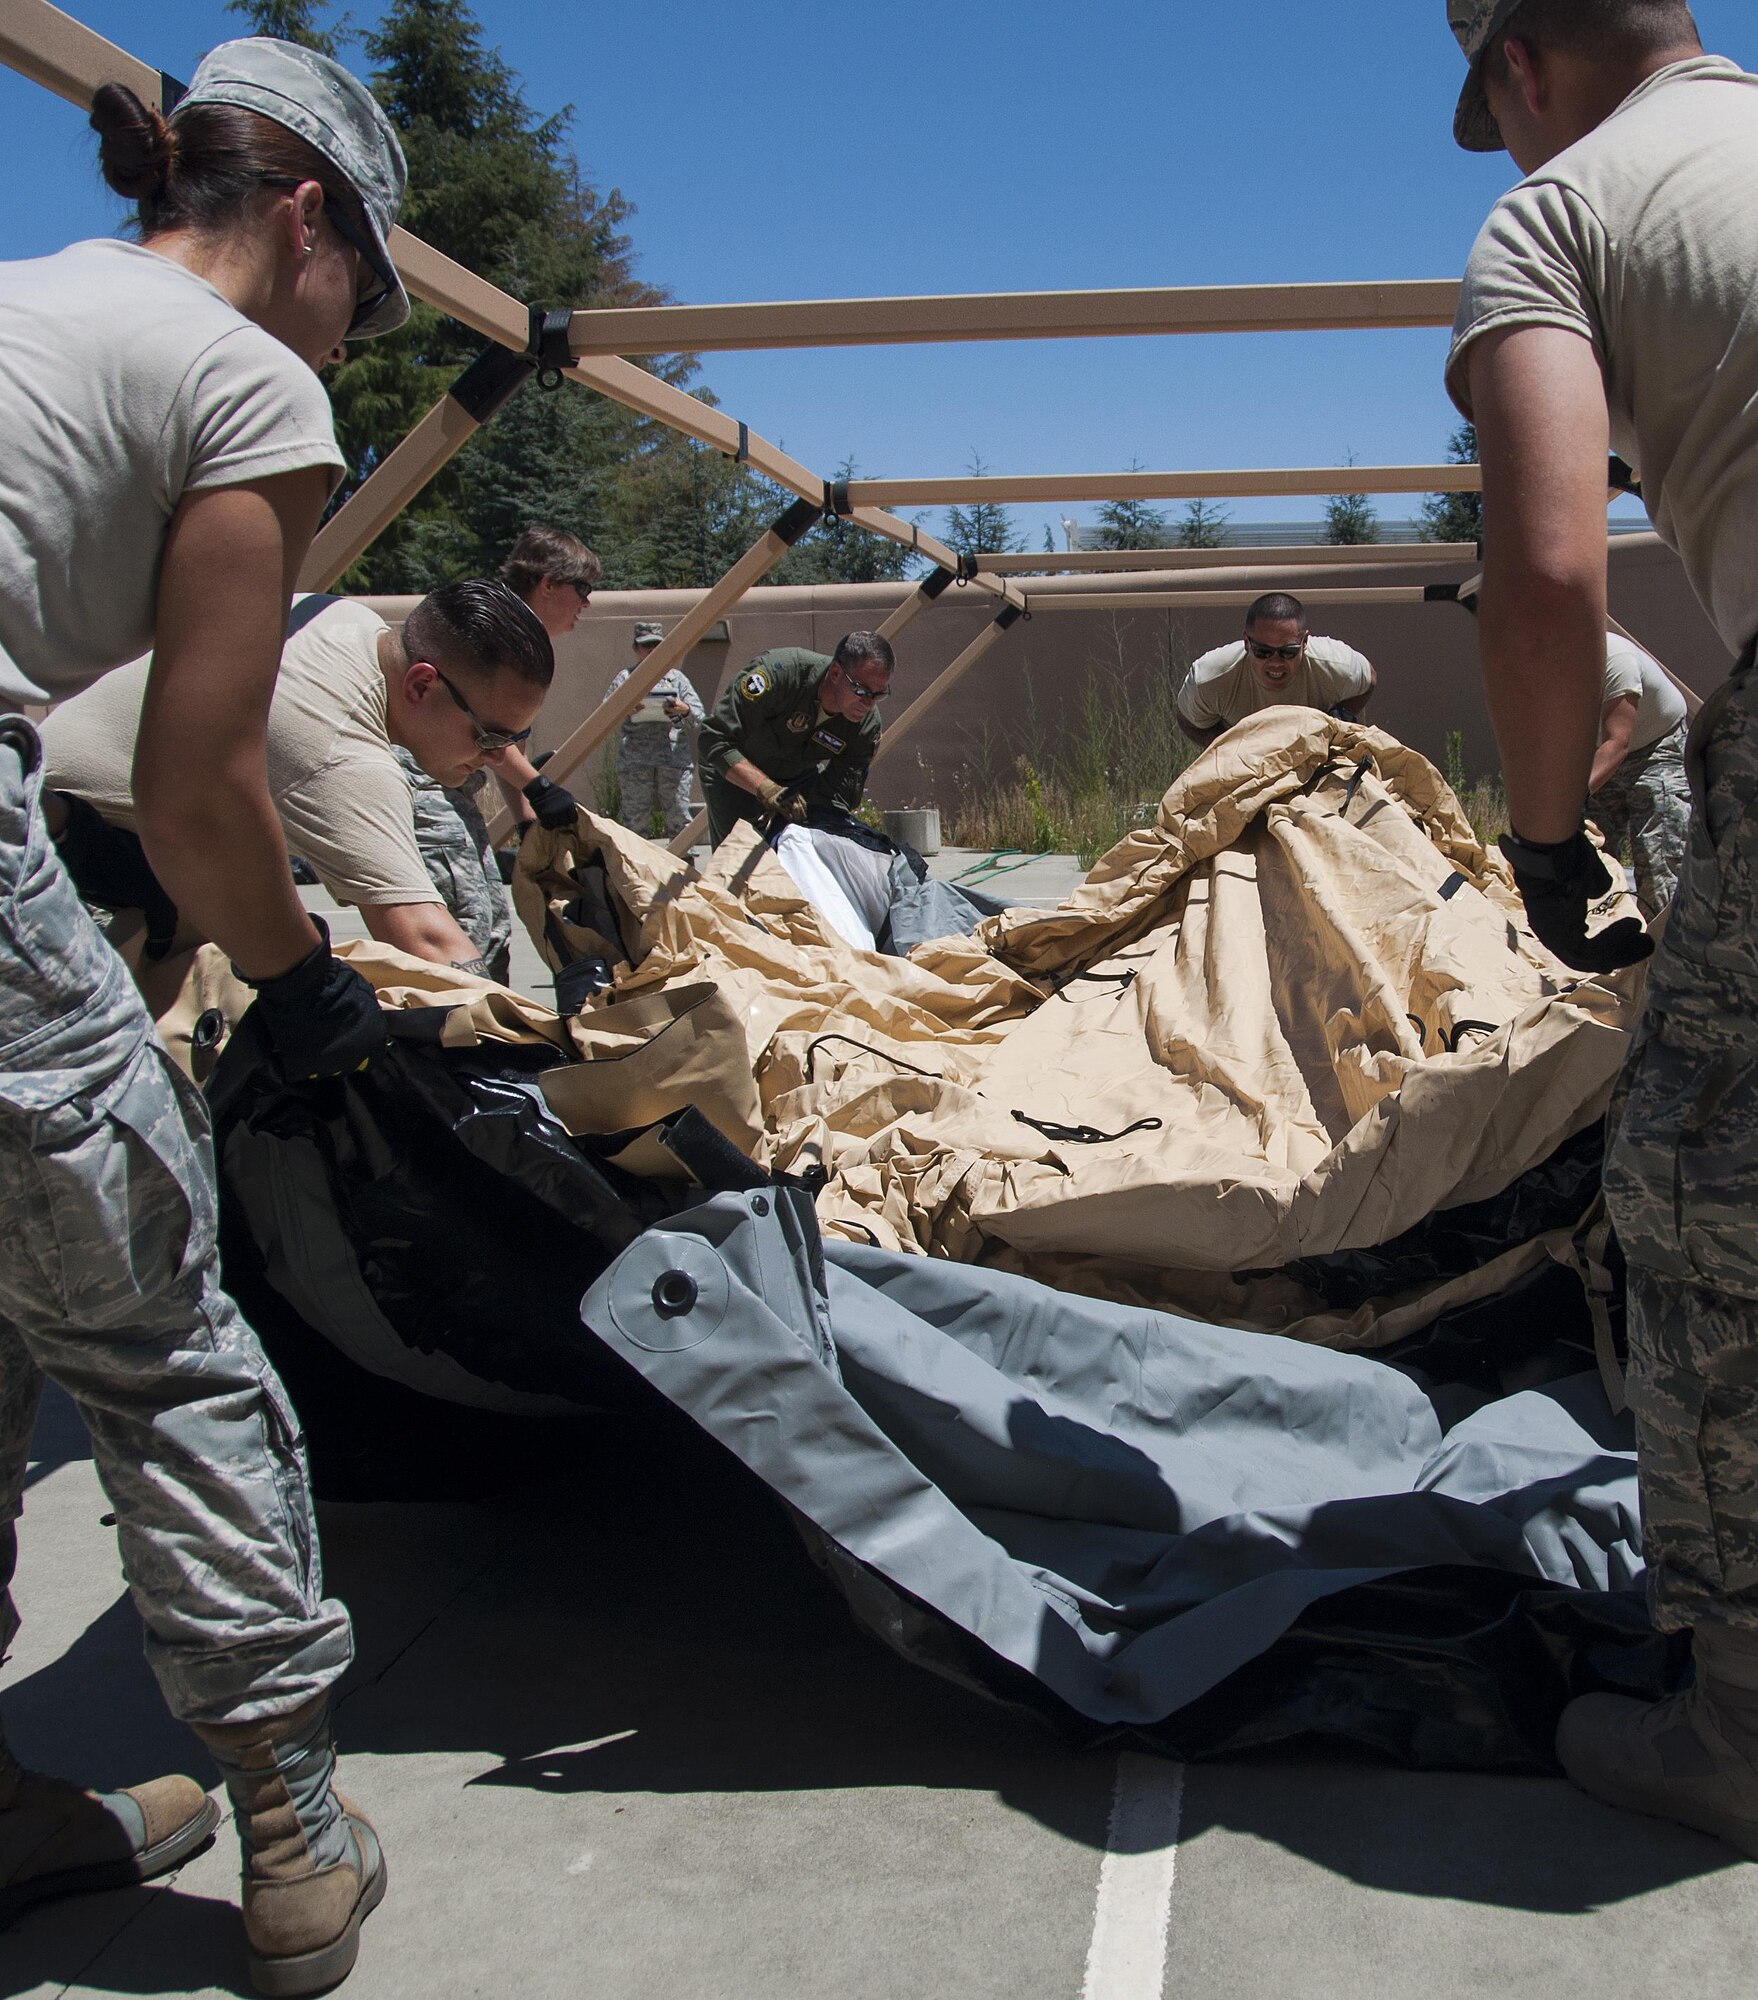 Members of the 349th Aeromedical Staging Squadron put together an En-Route Patient Staging Facility as part of a unit evaluation inspection for Patriot Wyvern at Travis Air Force Base, Cali., on July 22, 2017. The 349th ASTS members had one hour to set up the ERPSF and communications. They accomplished their task in less than 30 minutes. (U.S. Air Force photo by Staff Sgt. Daniel Phelps)